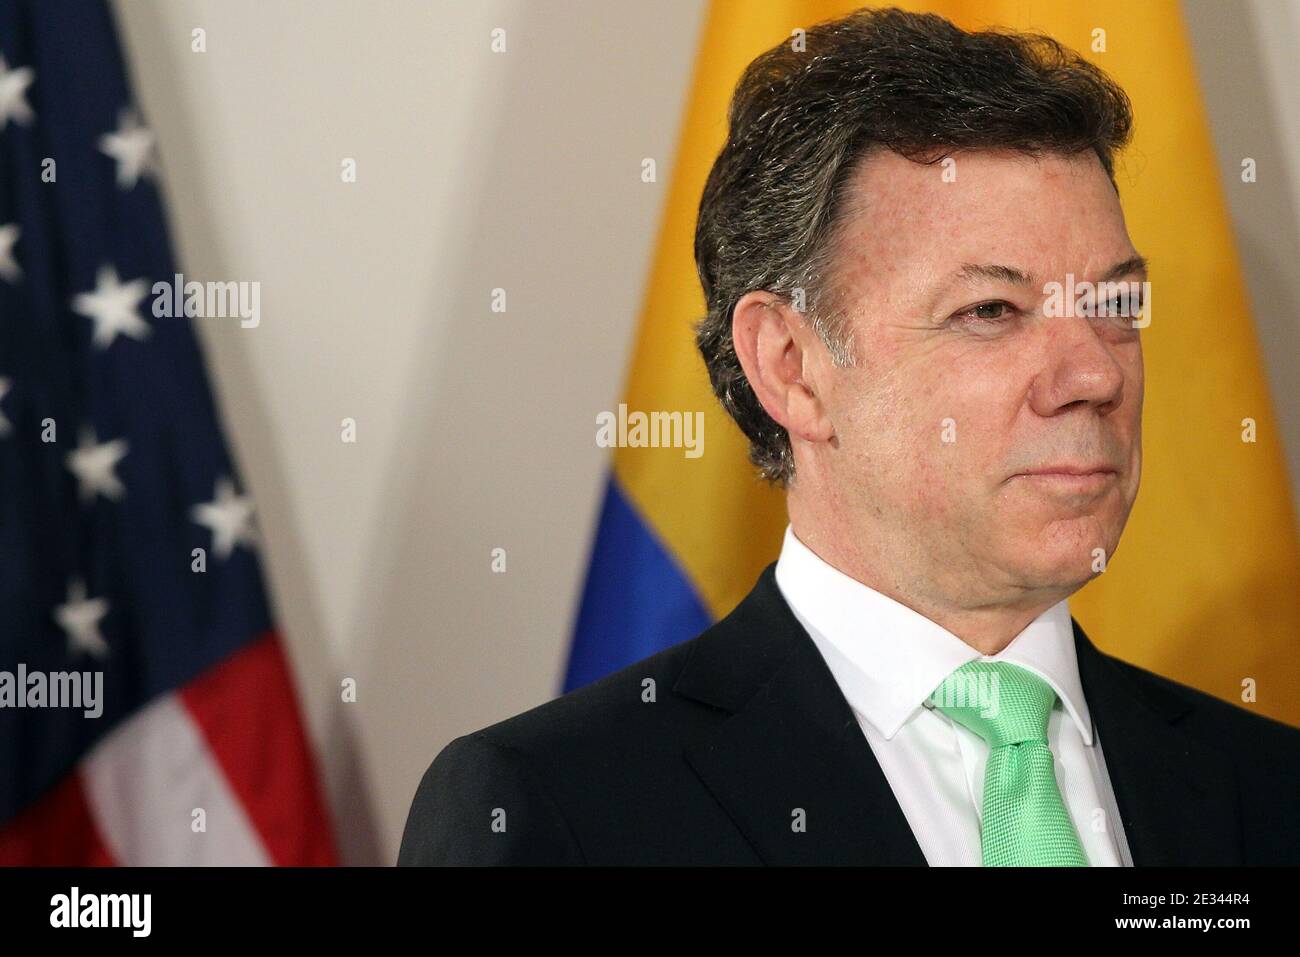 President Juan Manuel Santos Calderon of Colombia attends a bilateral meeting with U.S. President Barack Obama (not pictured) in New York City, NY, USA on September 24, 2010. Obama has been in New York since Wednesday attending the annual General Assembly at the United Nations, where yesterday he stressed the need for a resolution between Israel and Palestine, and a renewed international effort to keep Iran from attaining nuclear weapons. Photo by Spencer Platt/ABACAPRESS.COM (Pictured: Juan Manuel Santos Calderon) Stock Photo